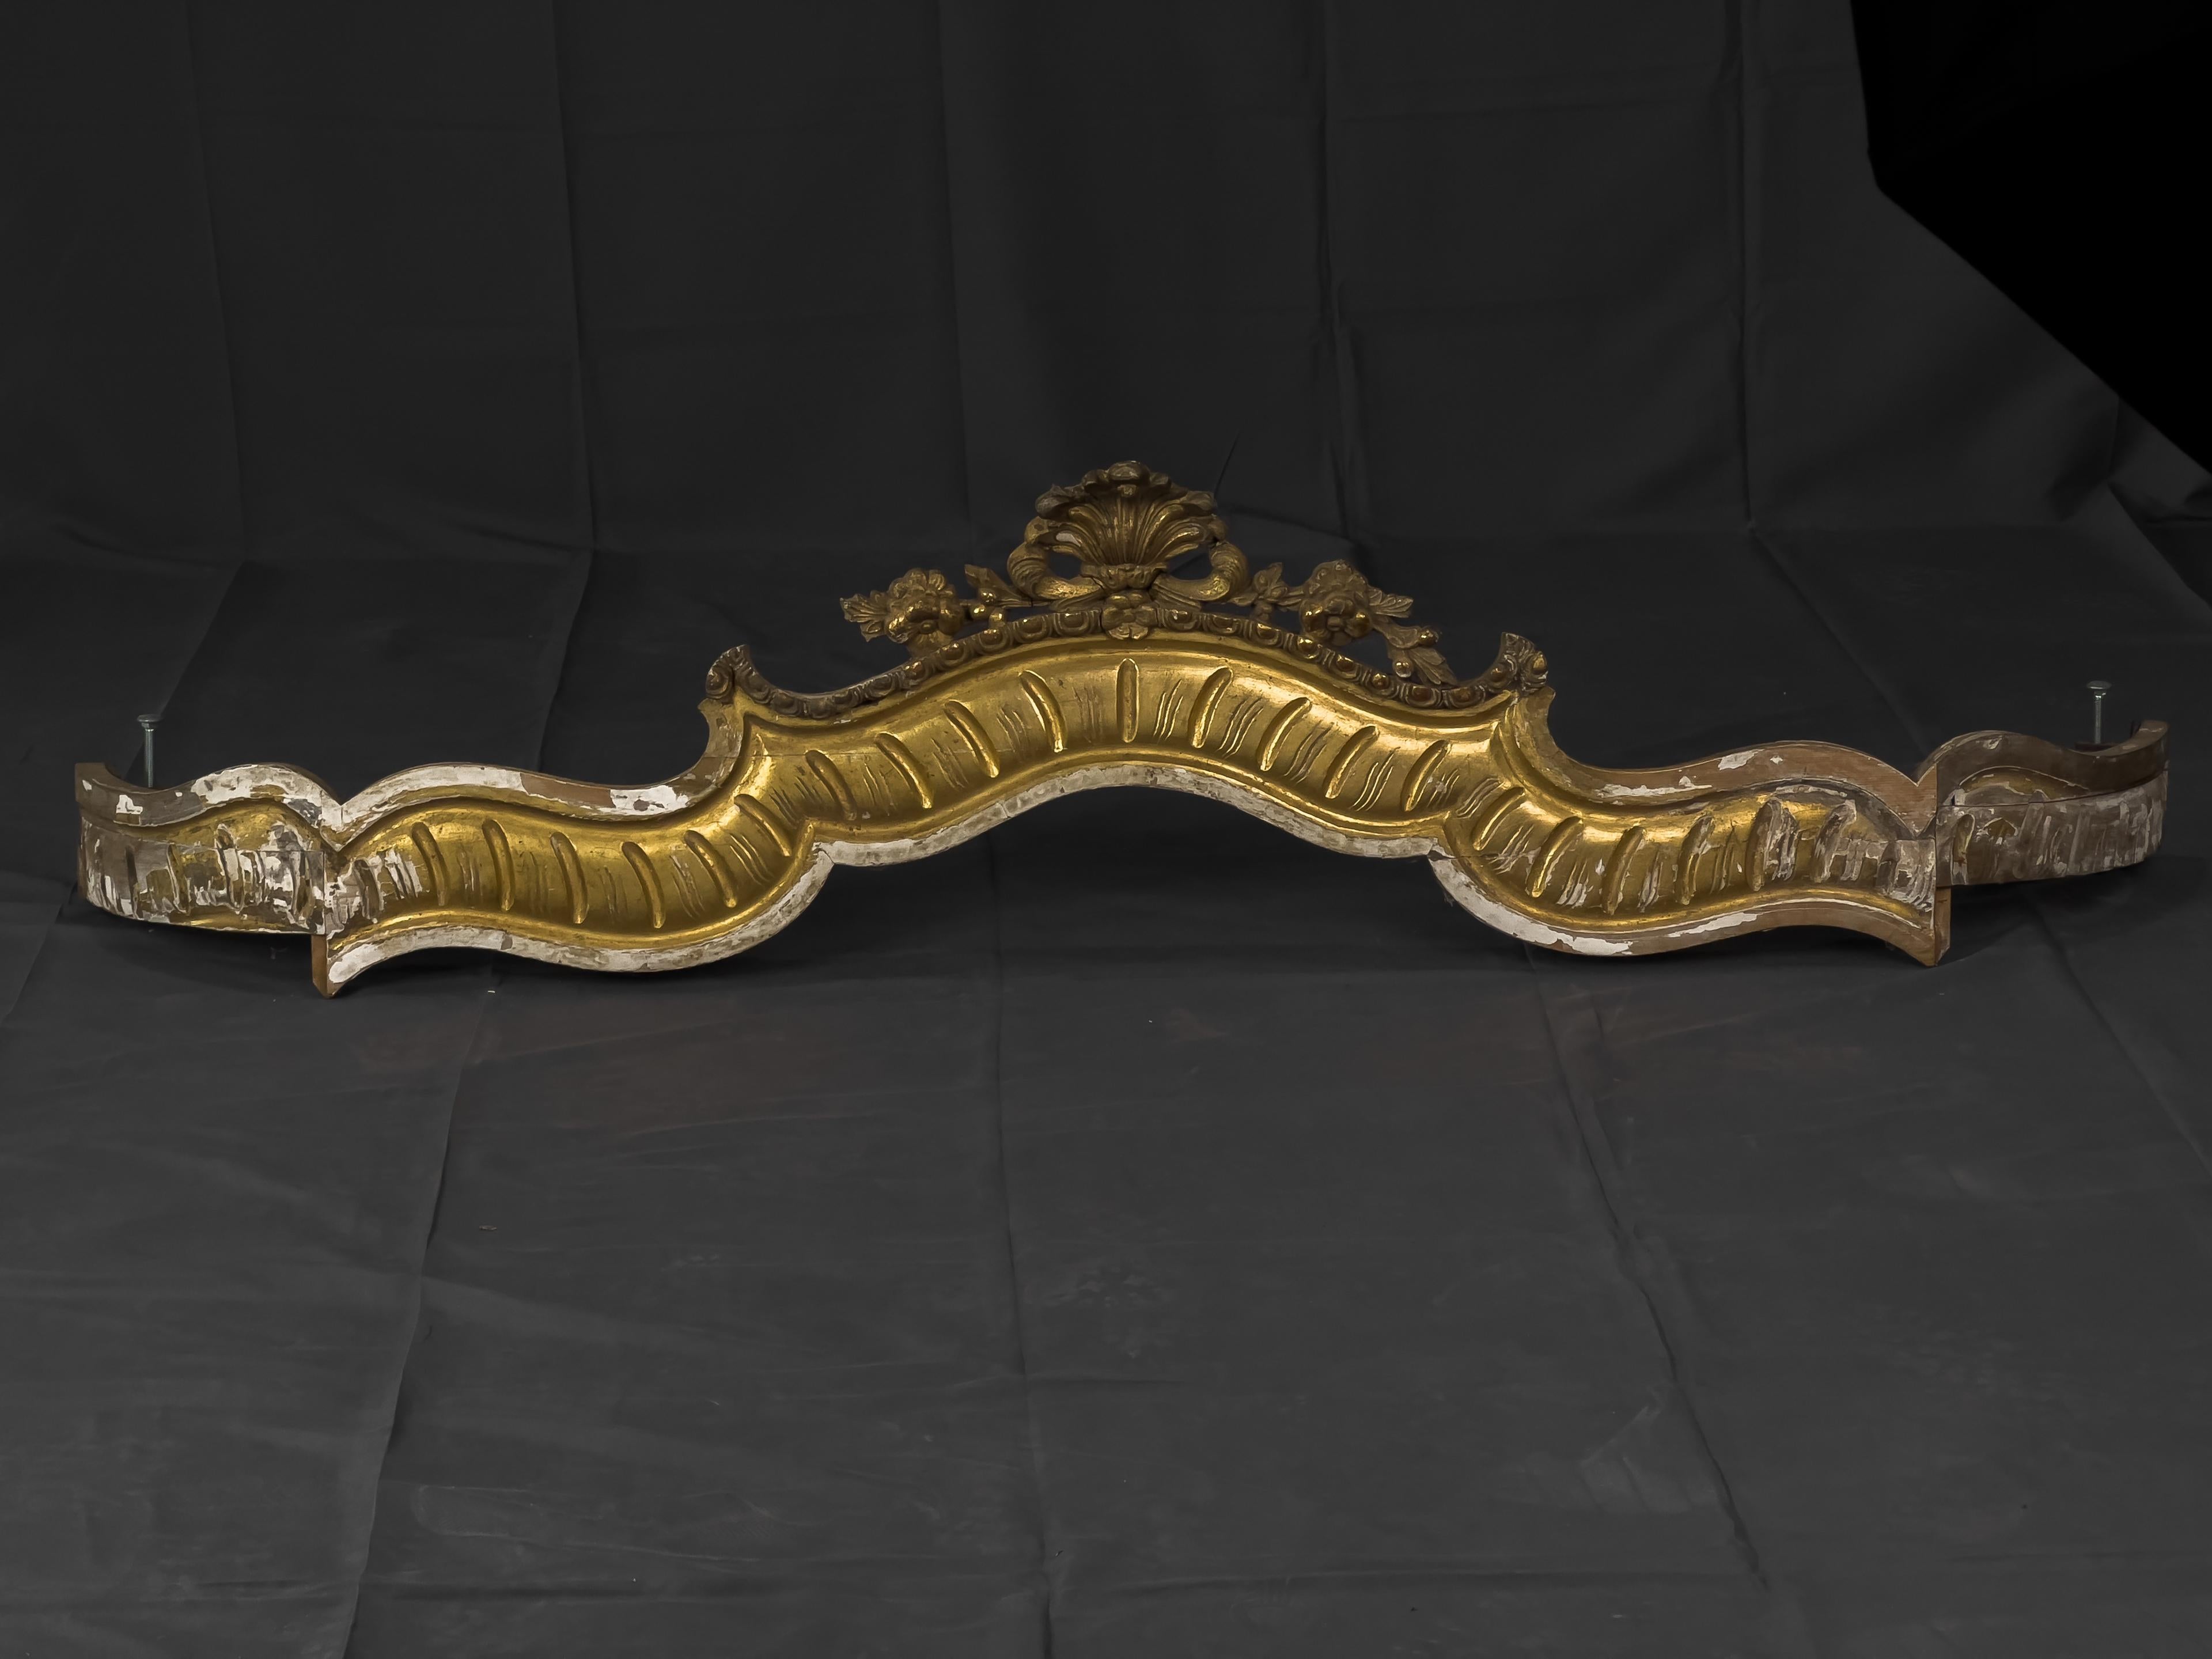 Gilt Rococo style bed crown canopy with carved detail and curvilinear shape.